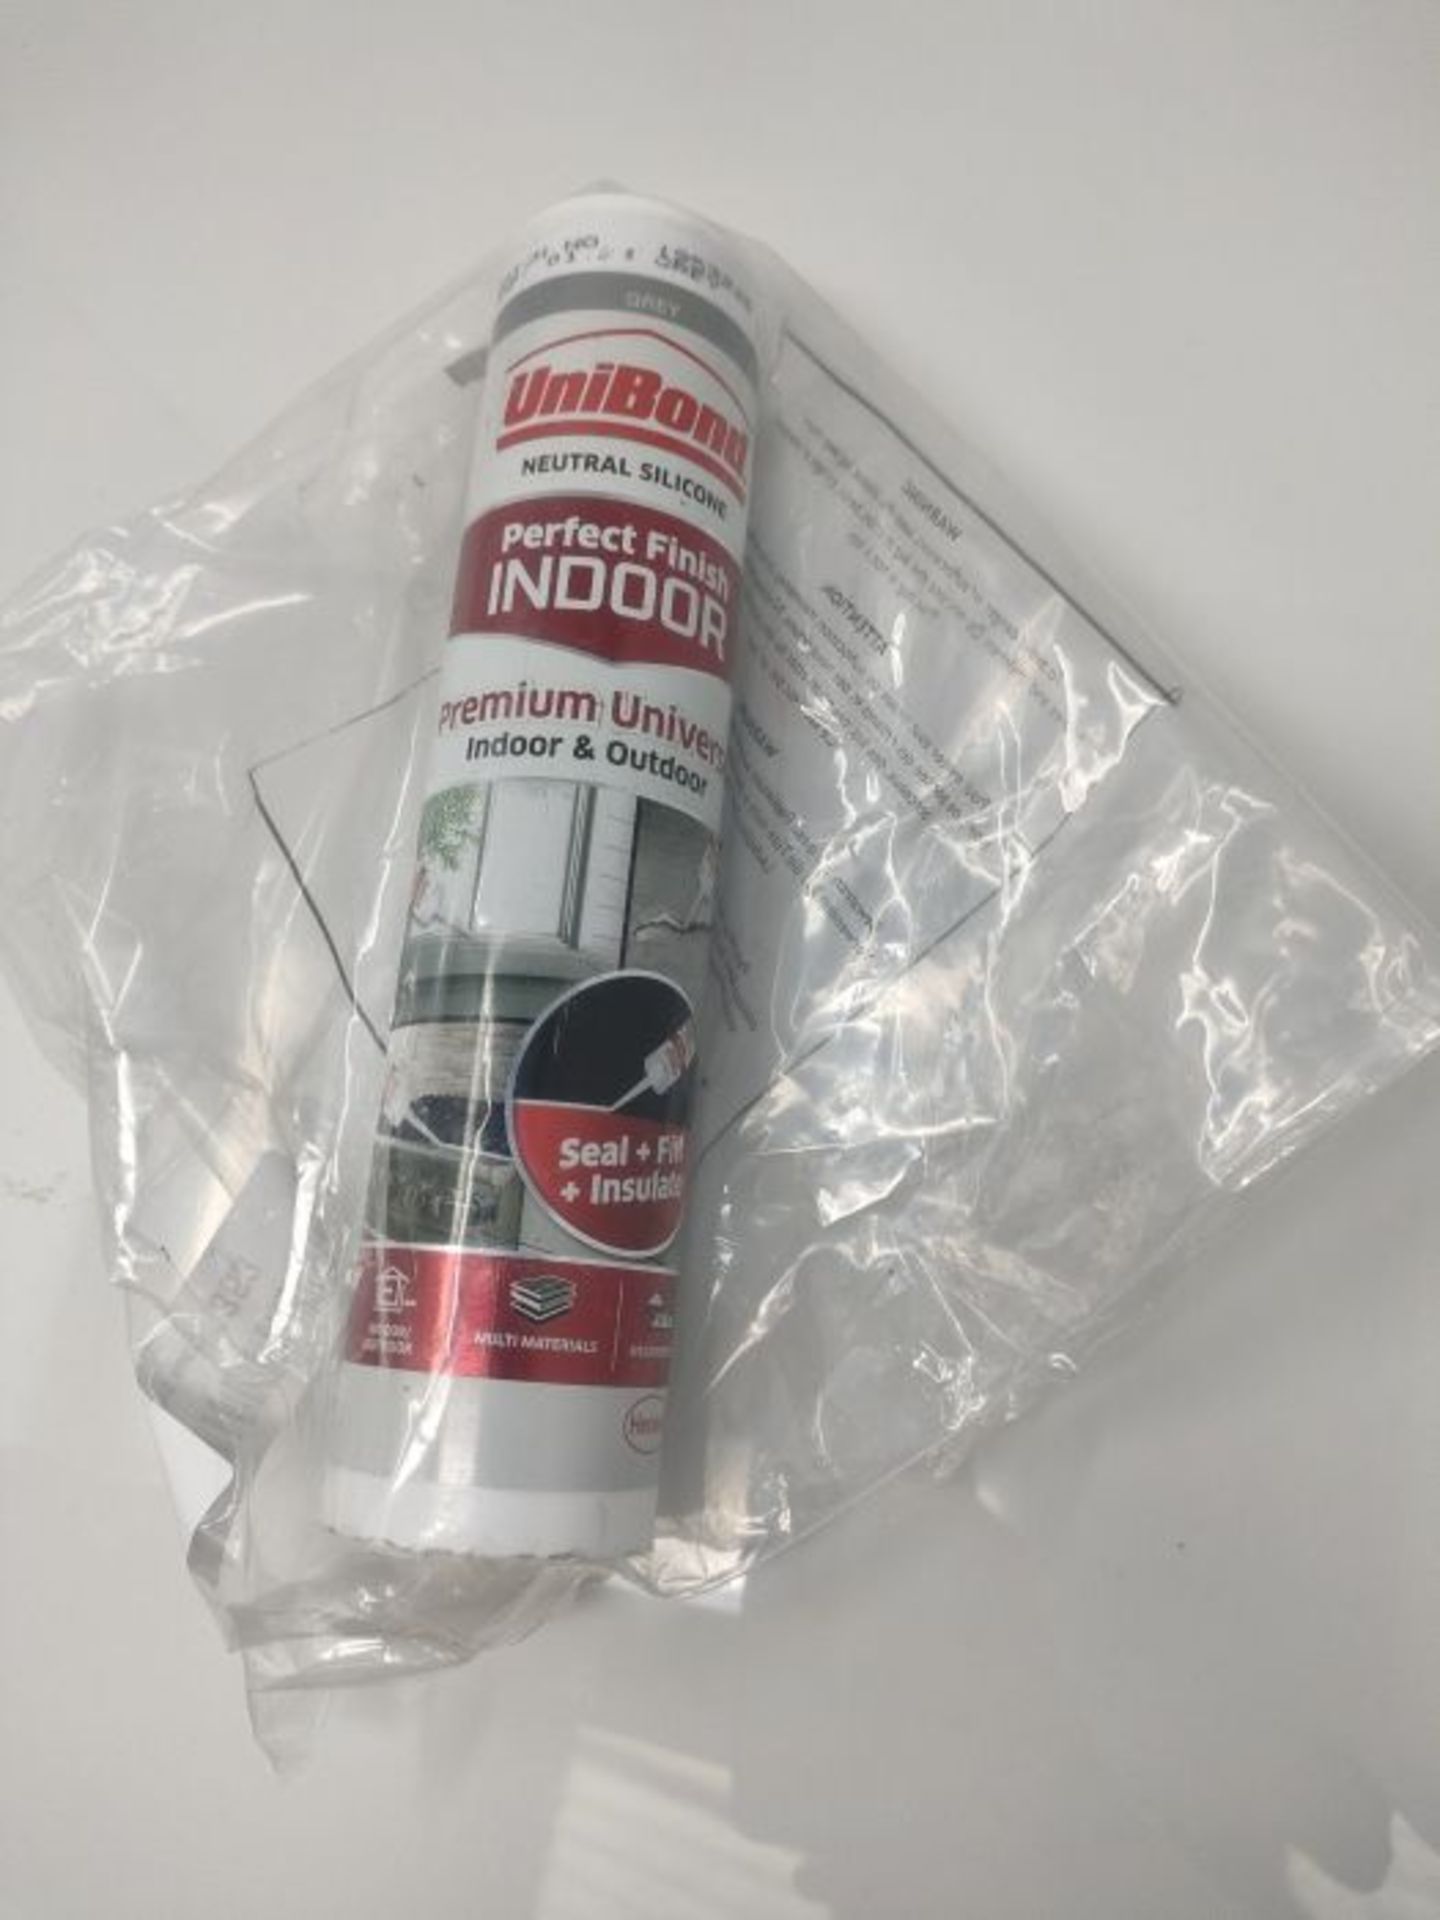 [INCOMPLETE] UniBond 2254877 Sealant Neutral Grey, 384g - Image 2 of 3